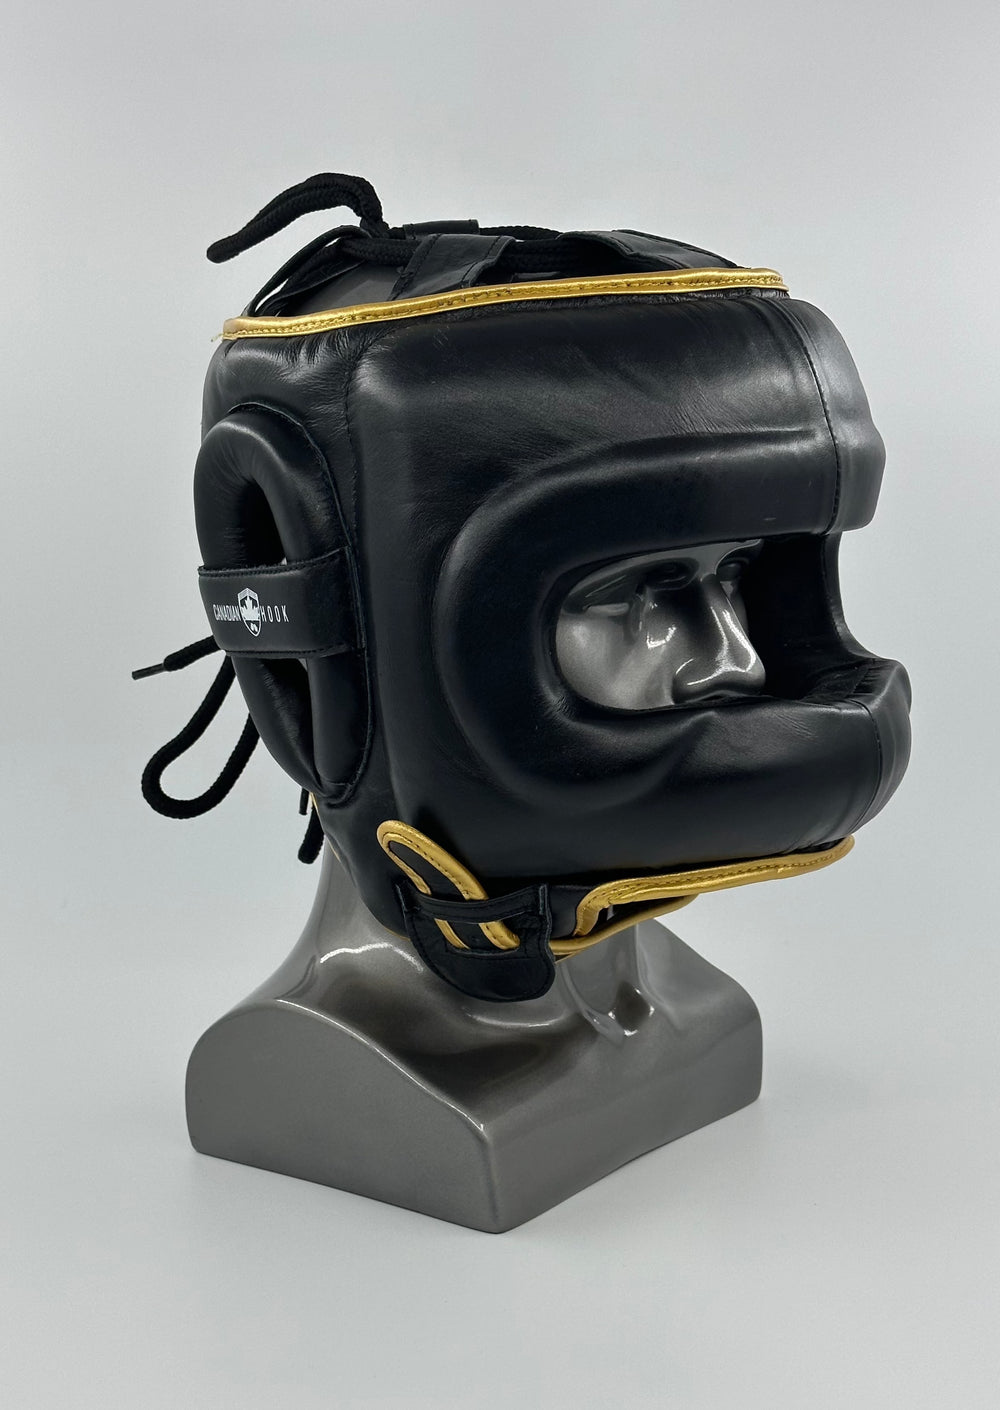 H90 SPARRING HEAD GUARD - BLACK/GOLD